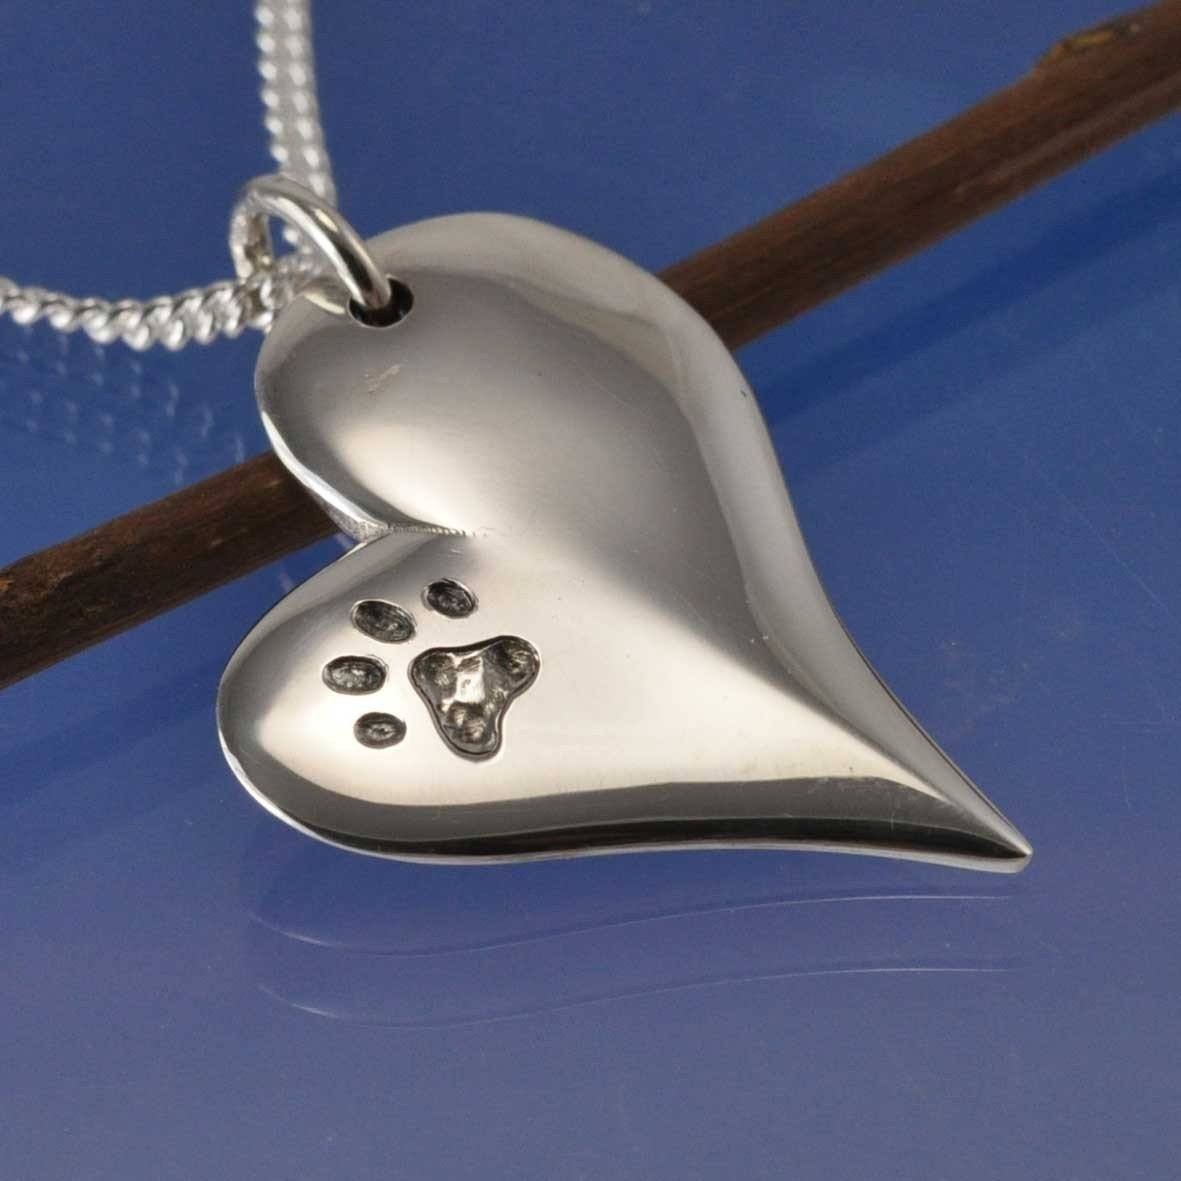 Cremation Ashes Necklace - Contemporary Heart Pendant by Chris Parry Jewellery